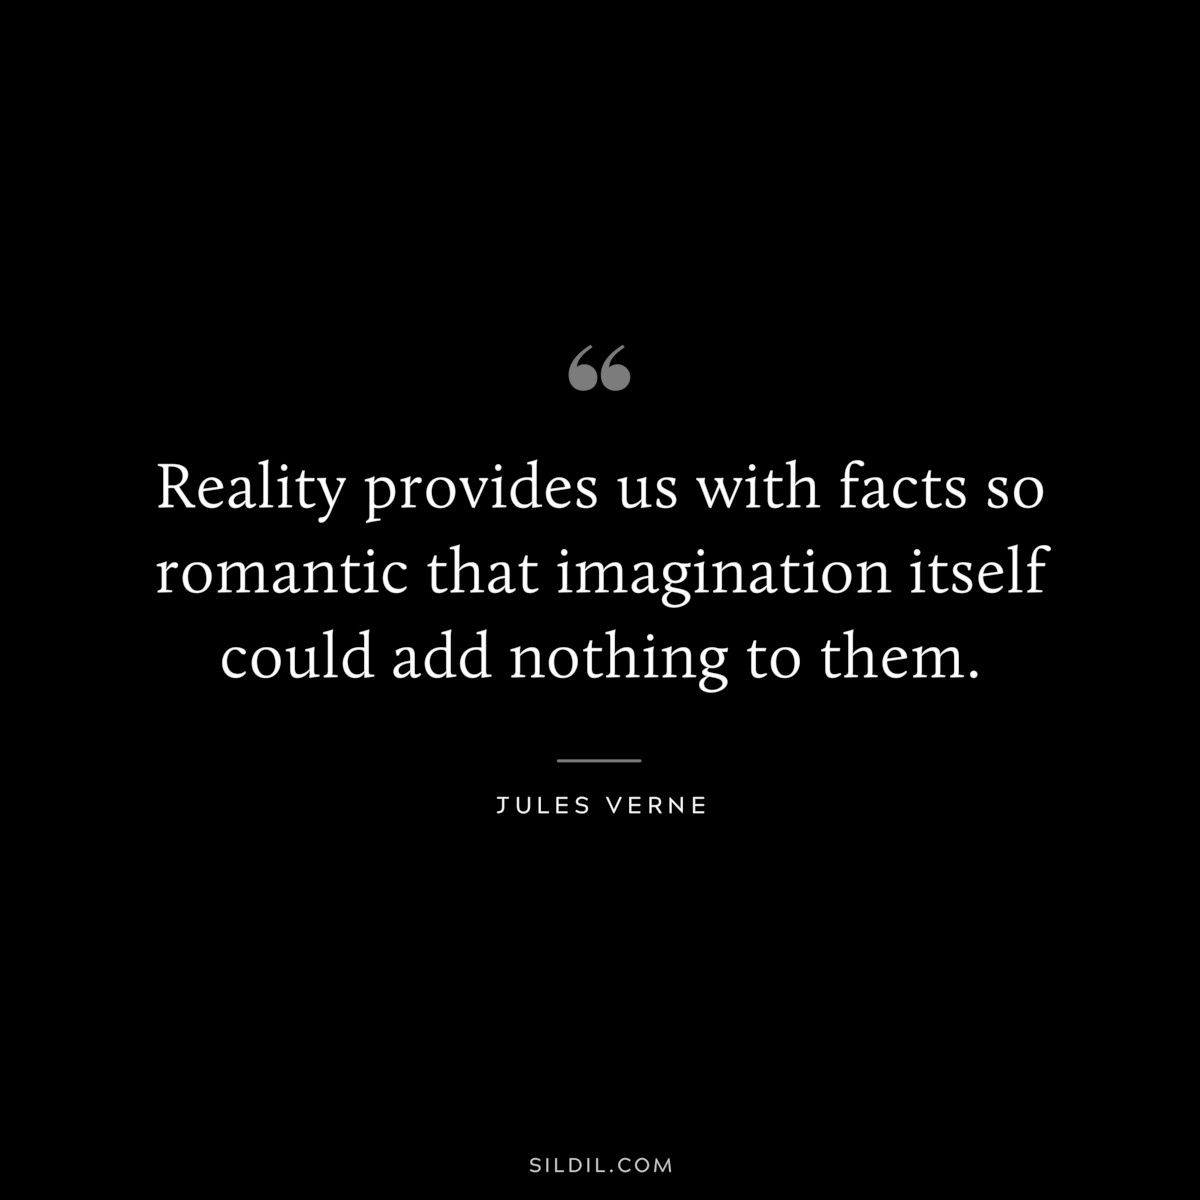 Reality provides us with facts so romantic that imagination itself could add nothing to them.